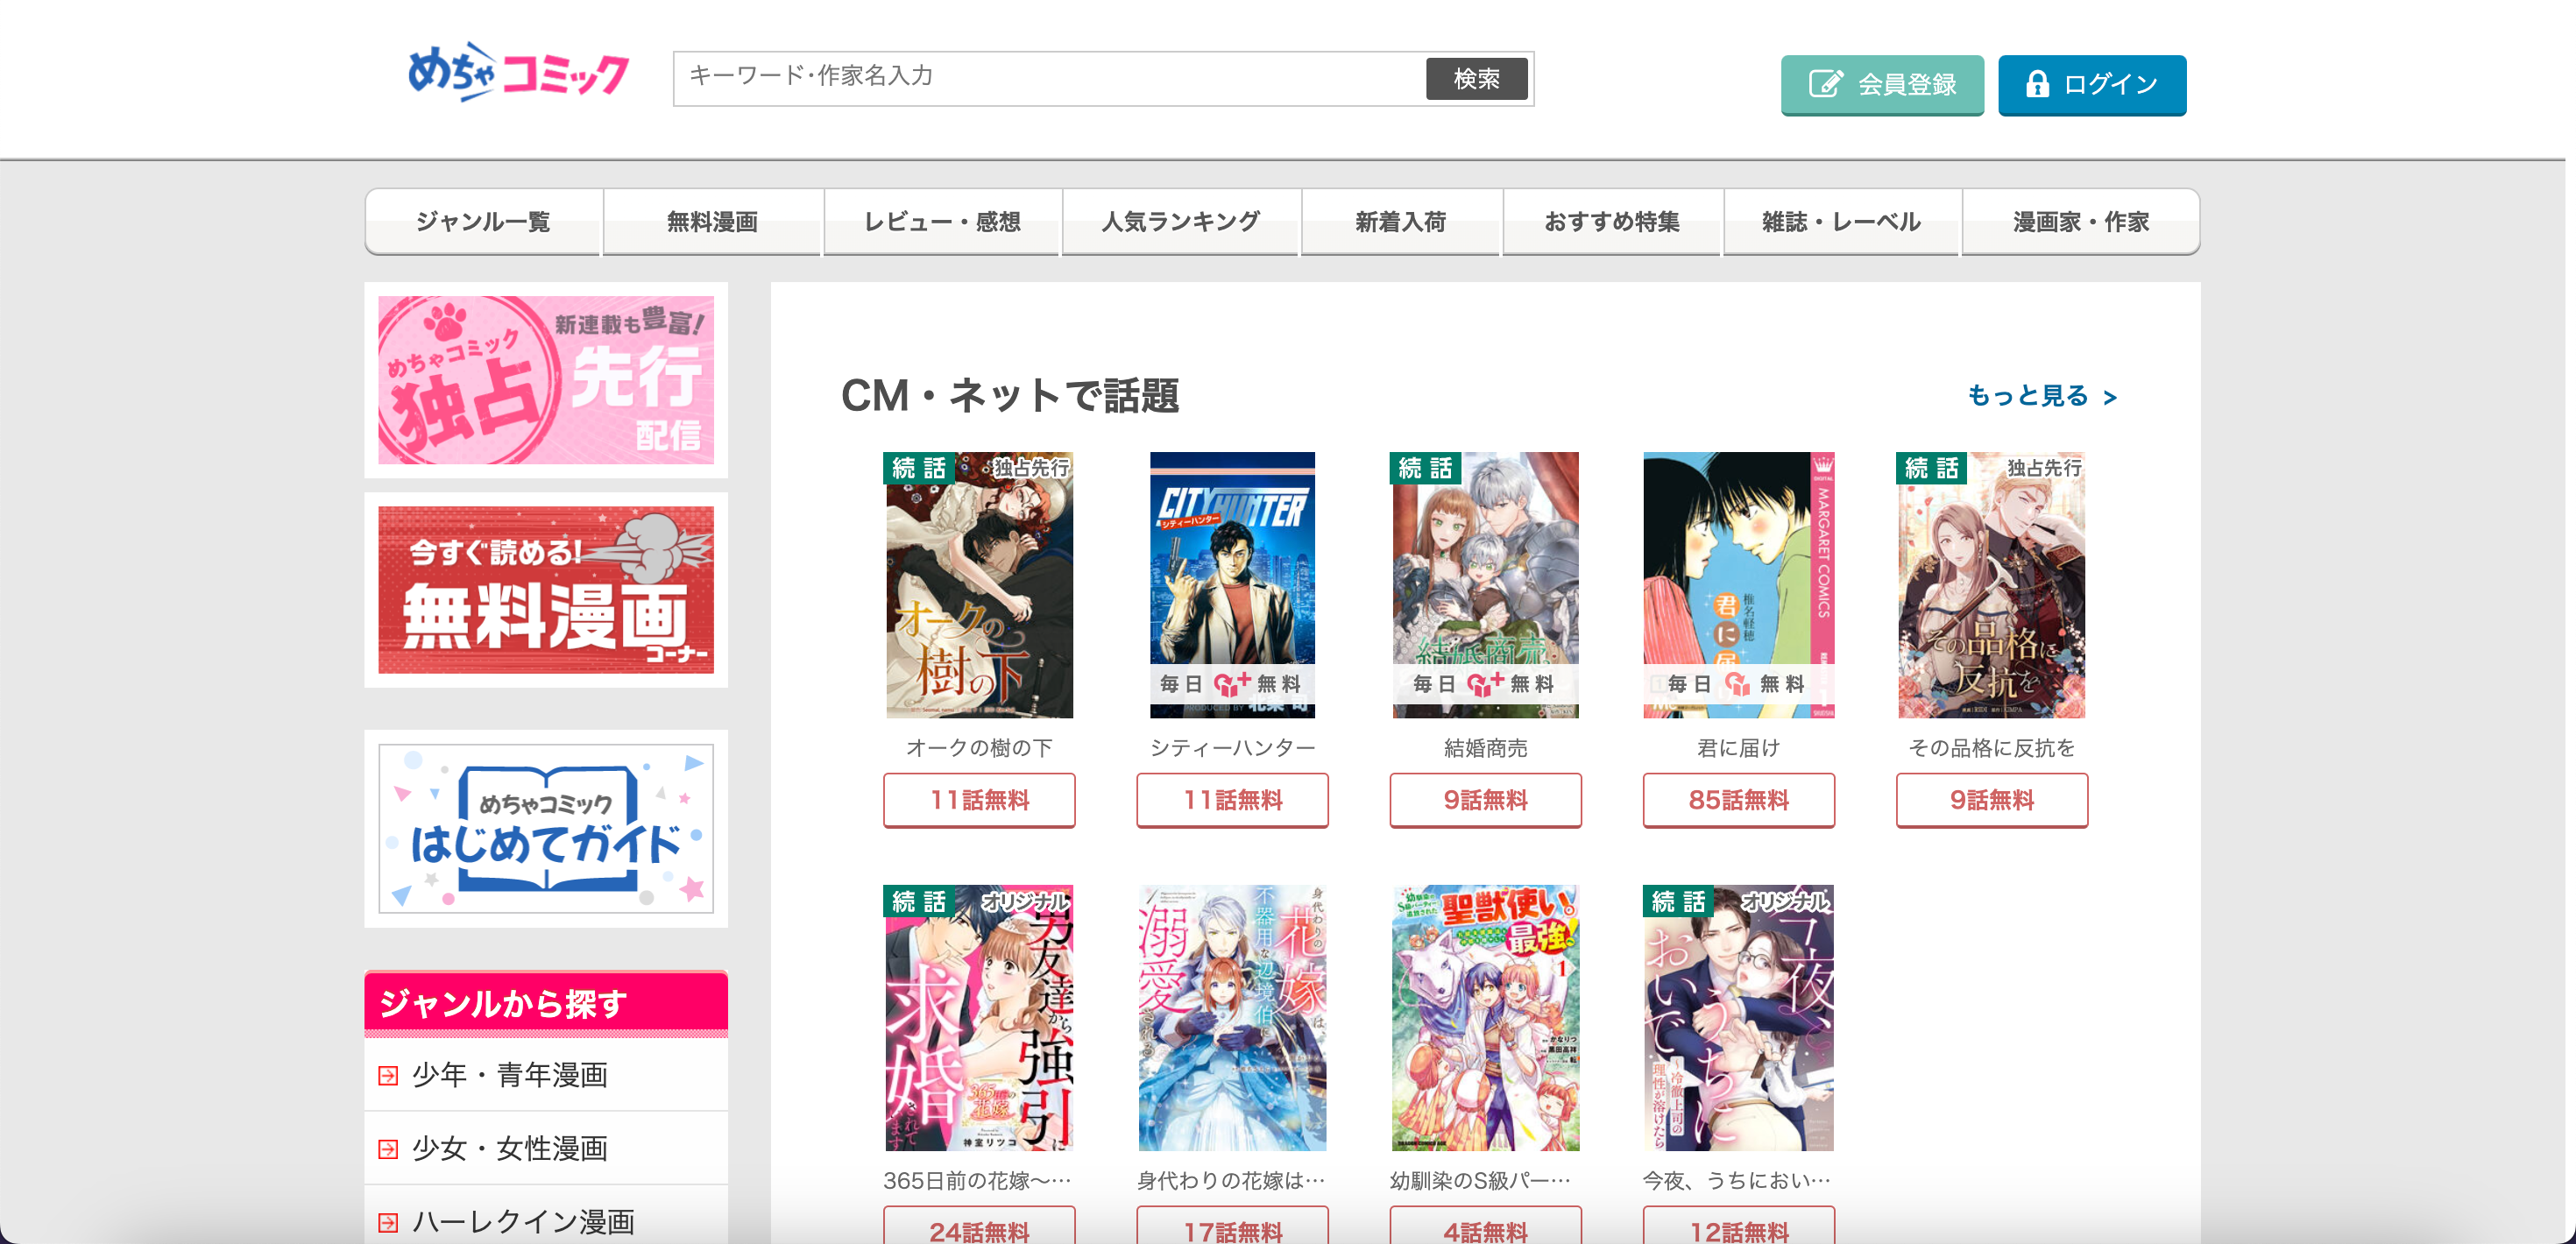 A screenshot of the Mecha Comic interface where fans can read manga online in Japanese.